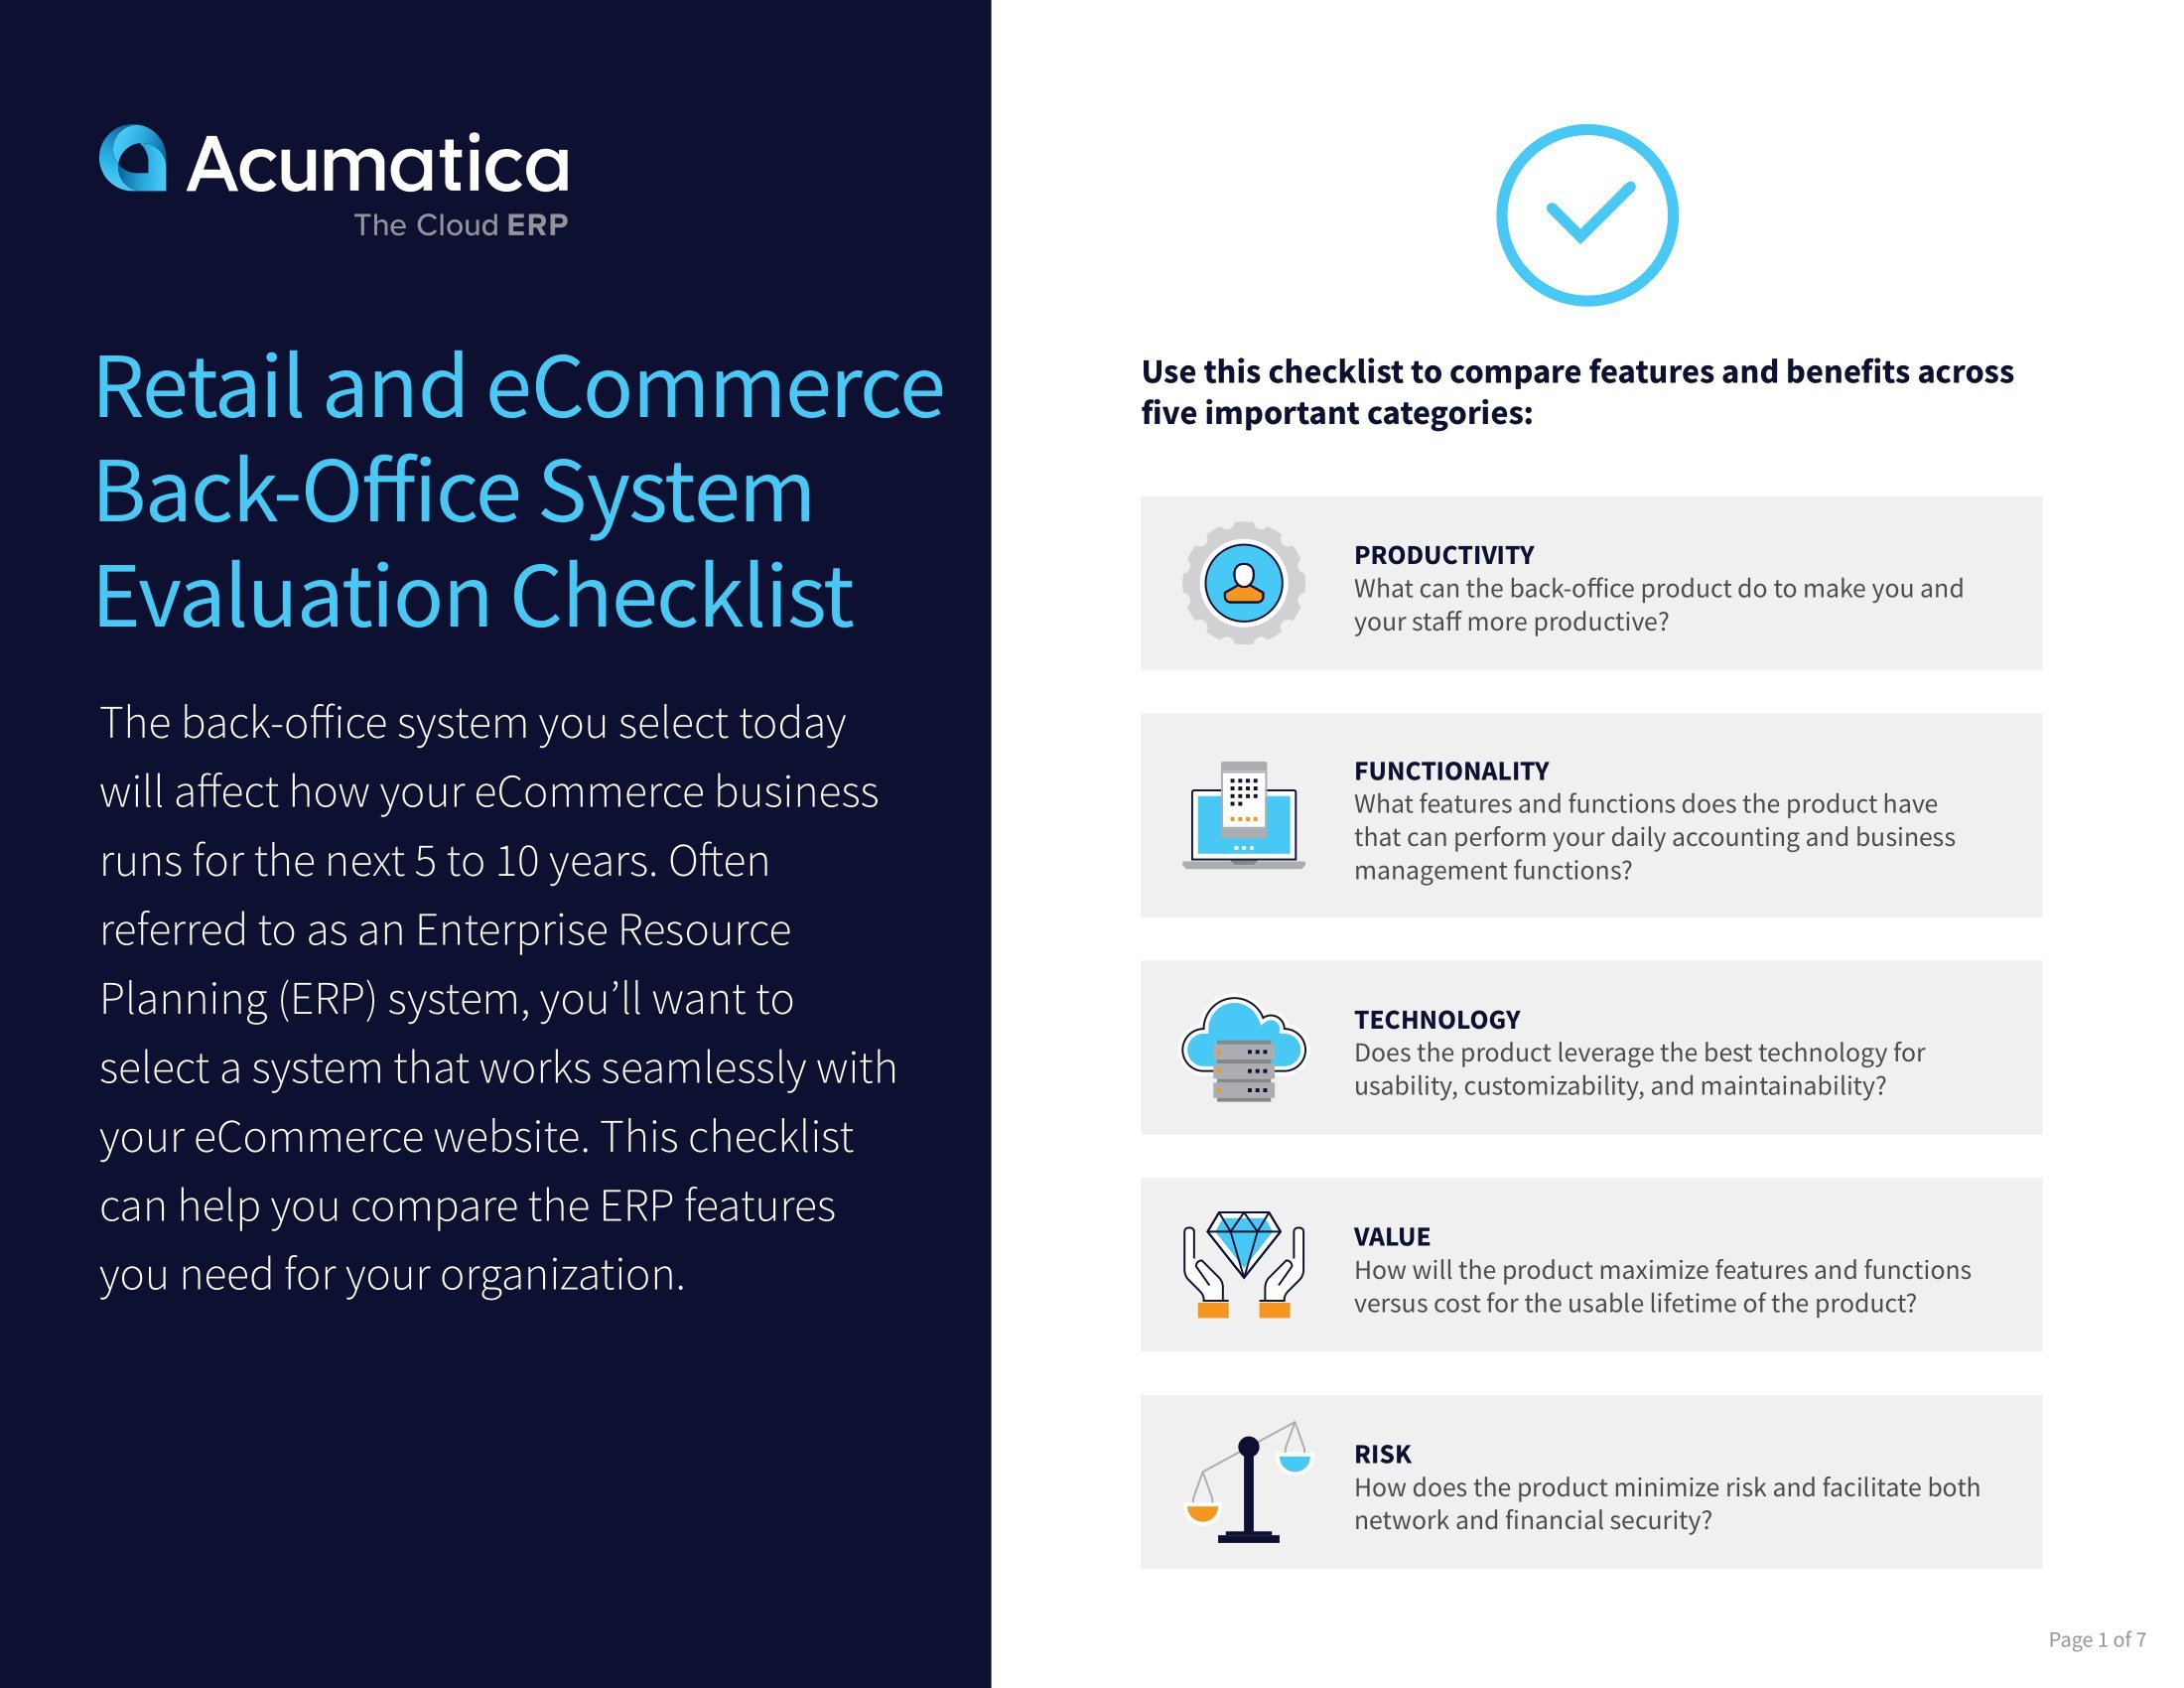 Select the right back-office system for your eCommerce business.